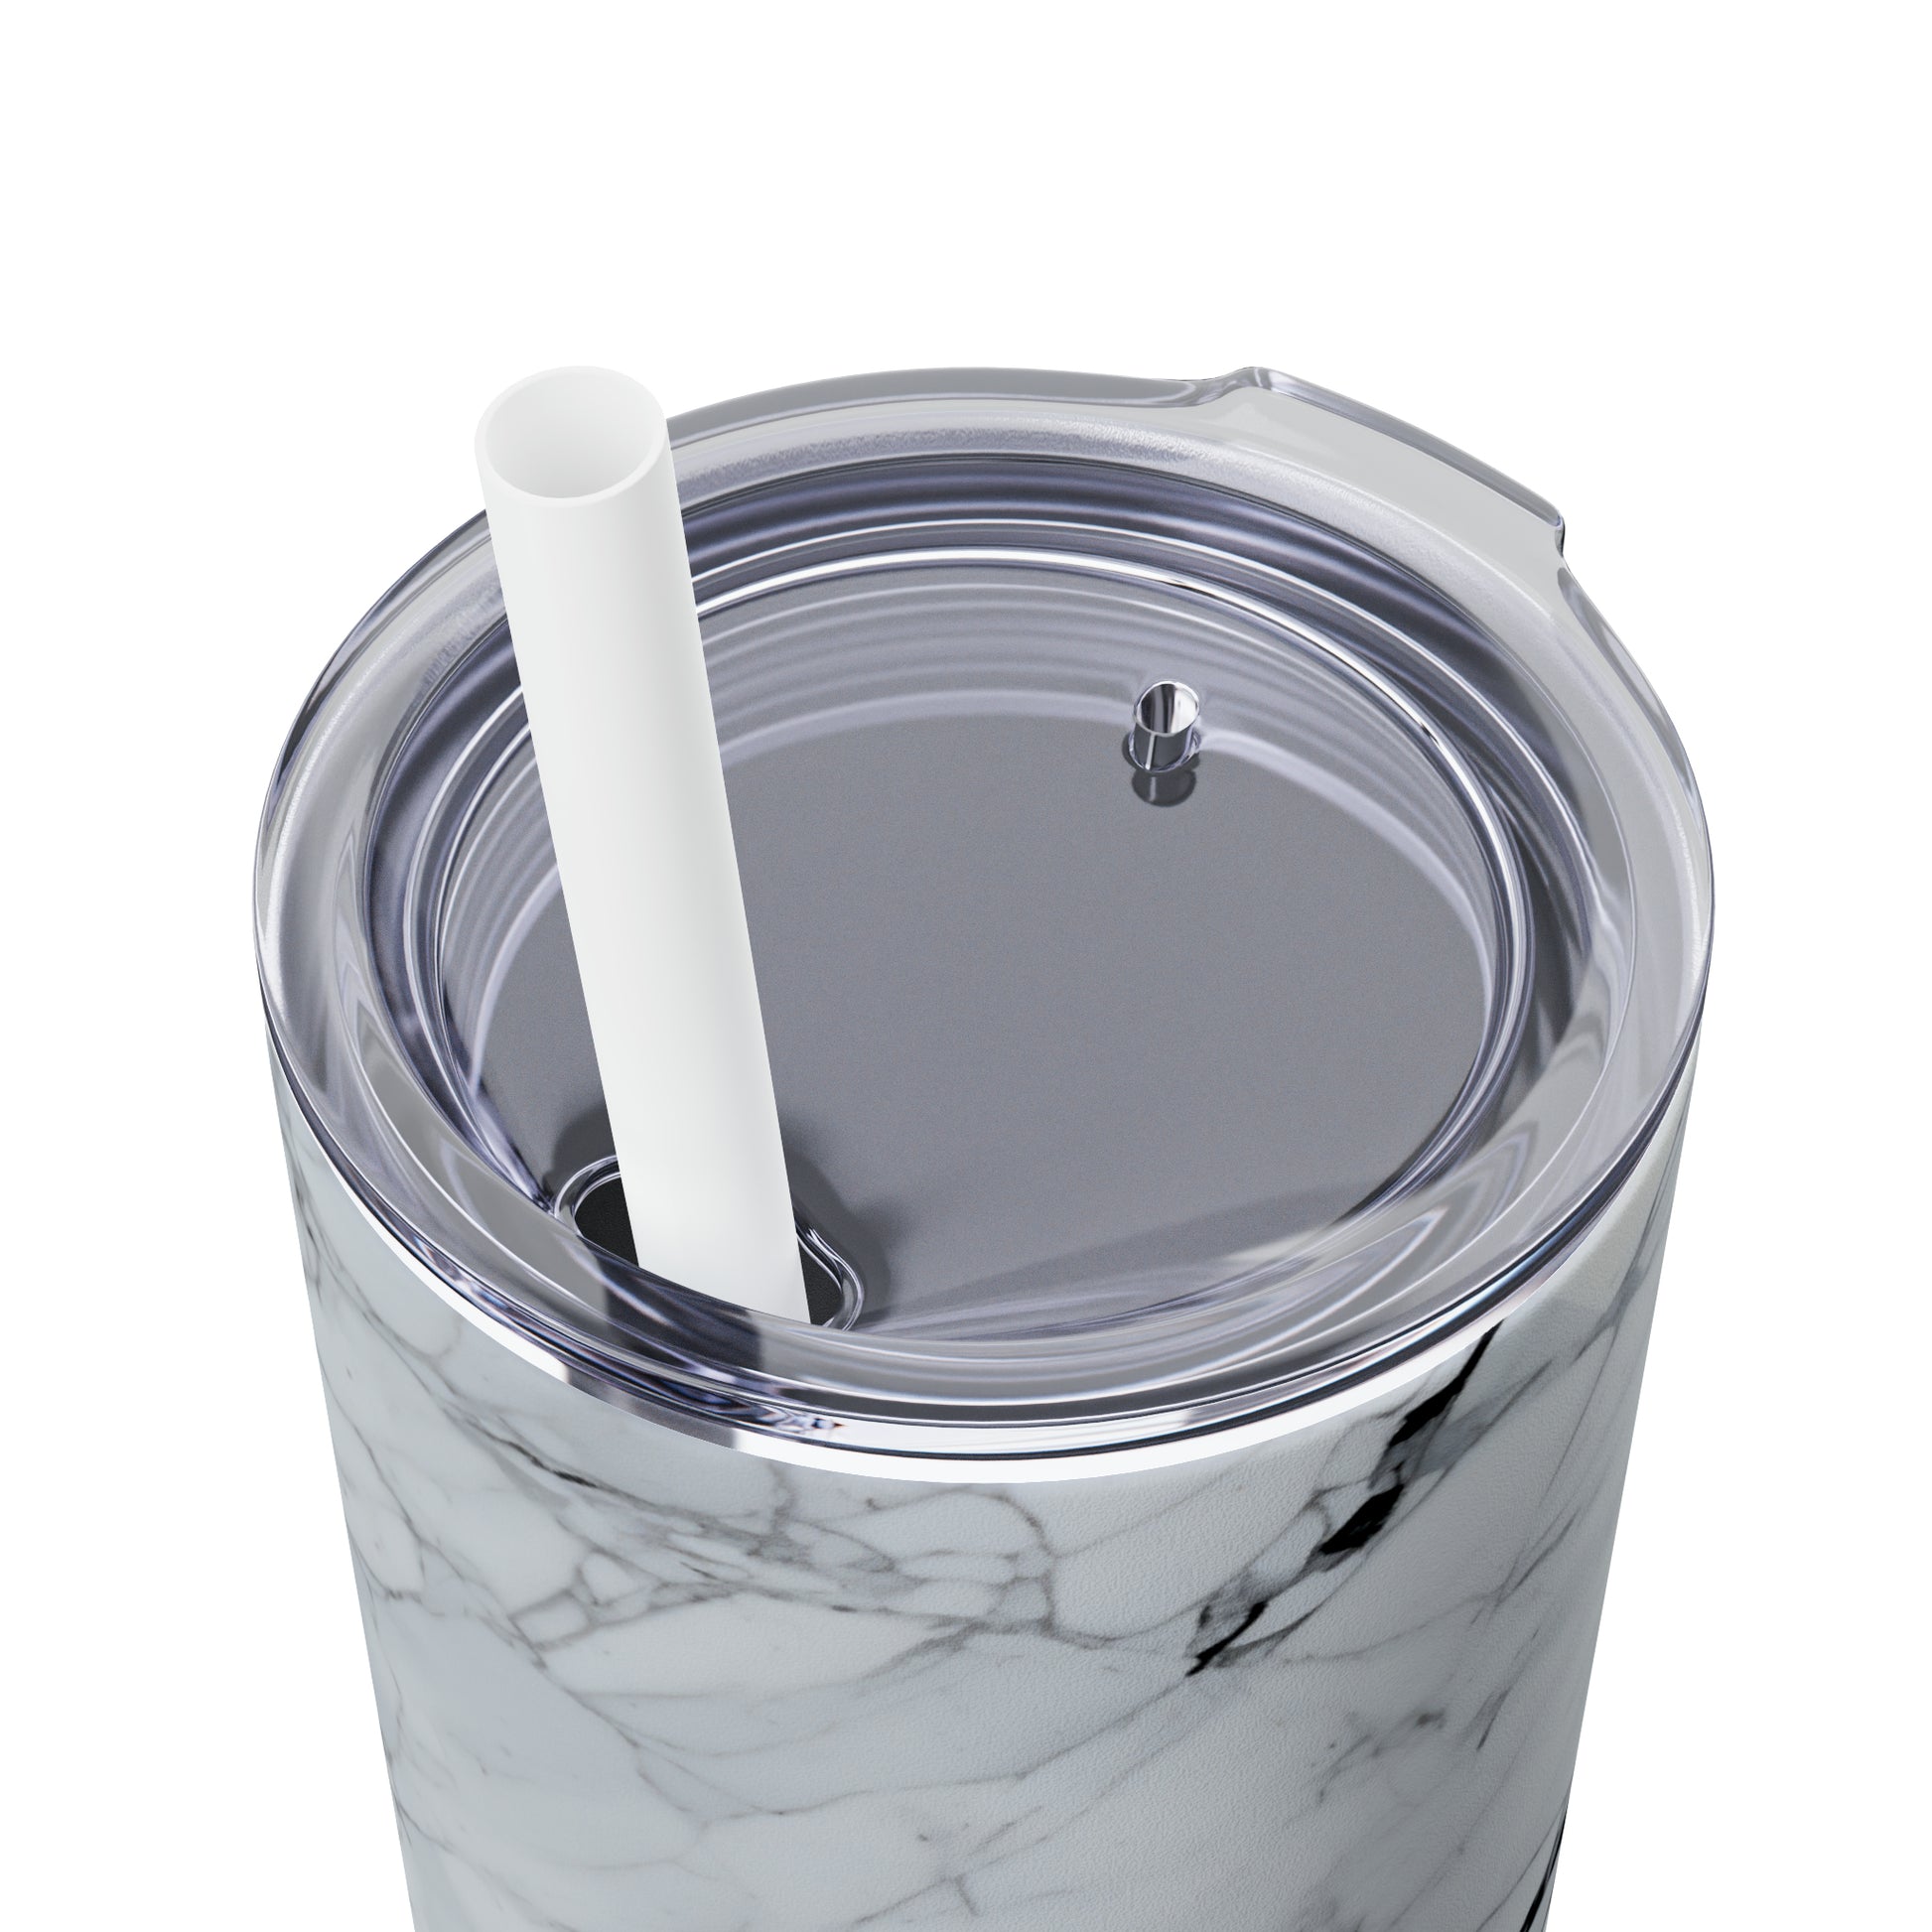 Gray Marble 20-Ounce Steel Skinny Tumbler with Lid and Straw - Dyborn Designs